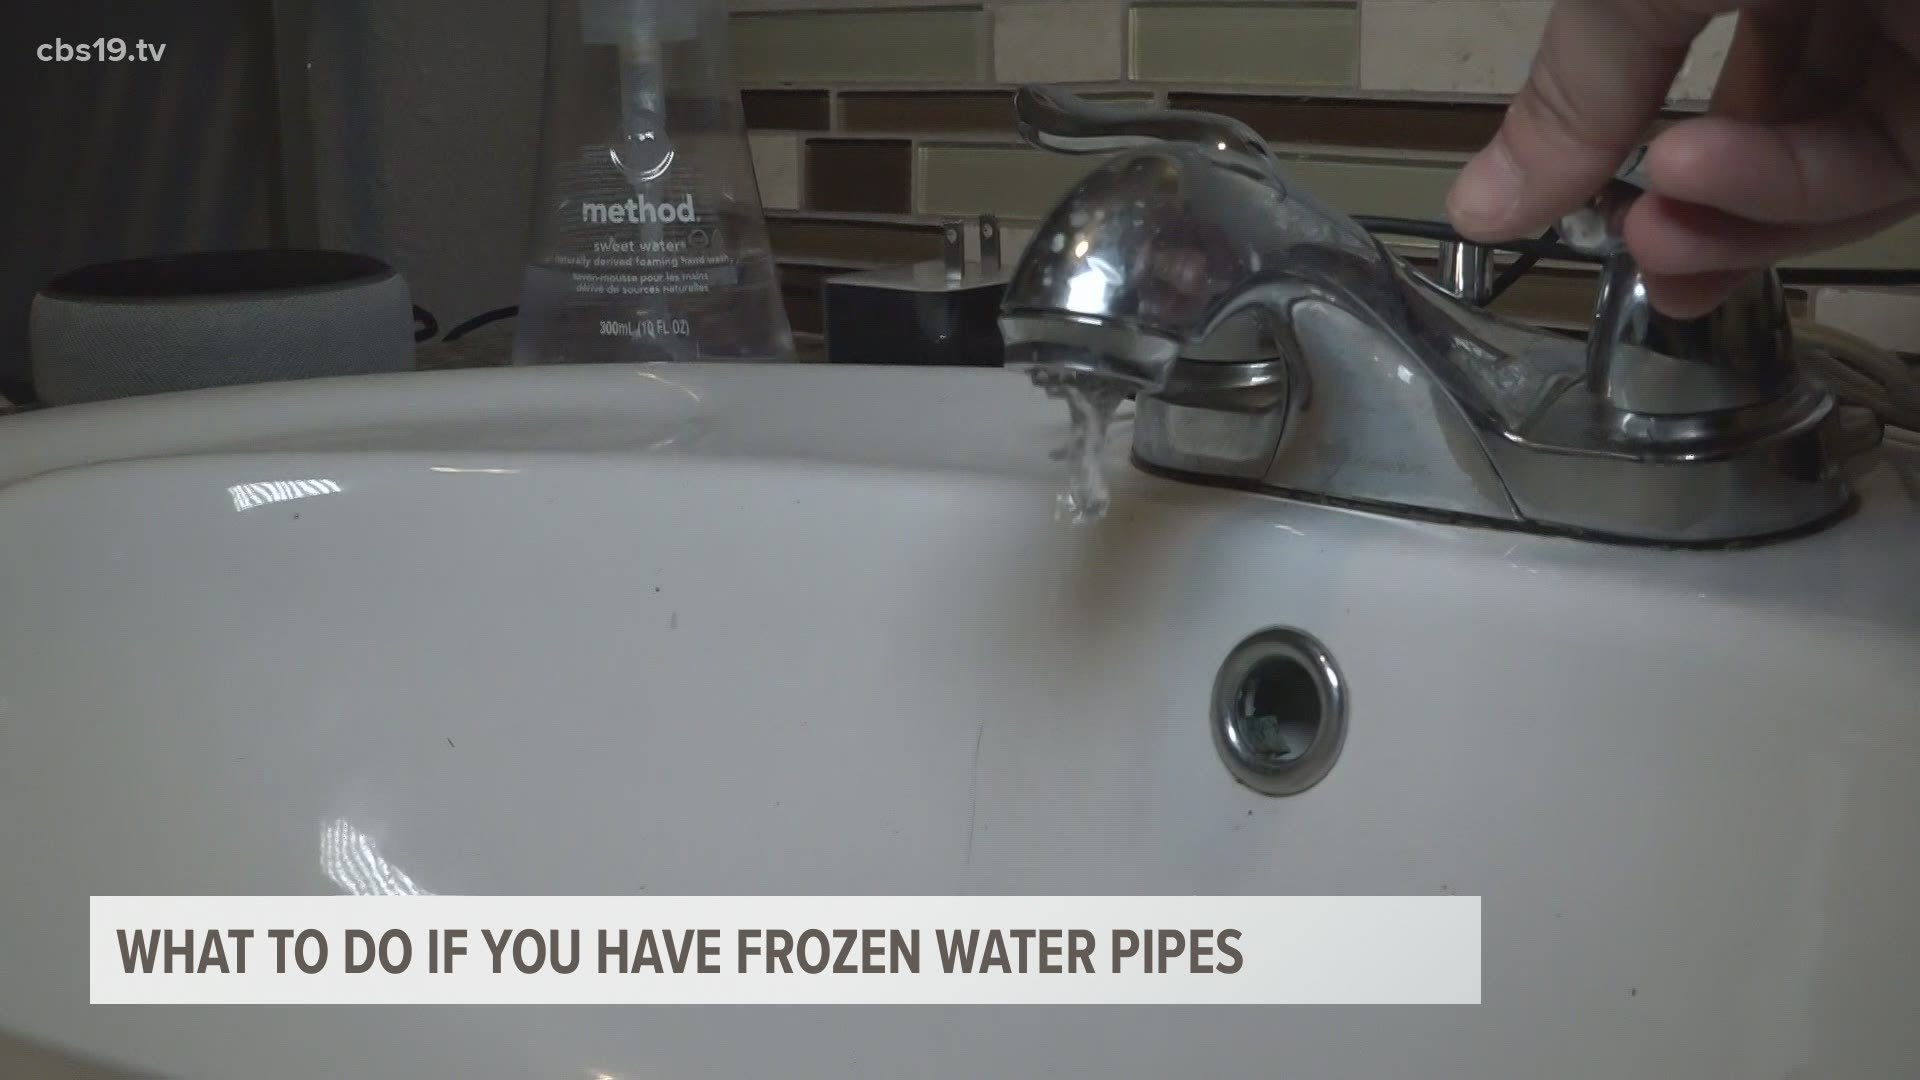 Are your water pipes frozen? Here are some things you can do